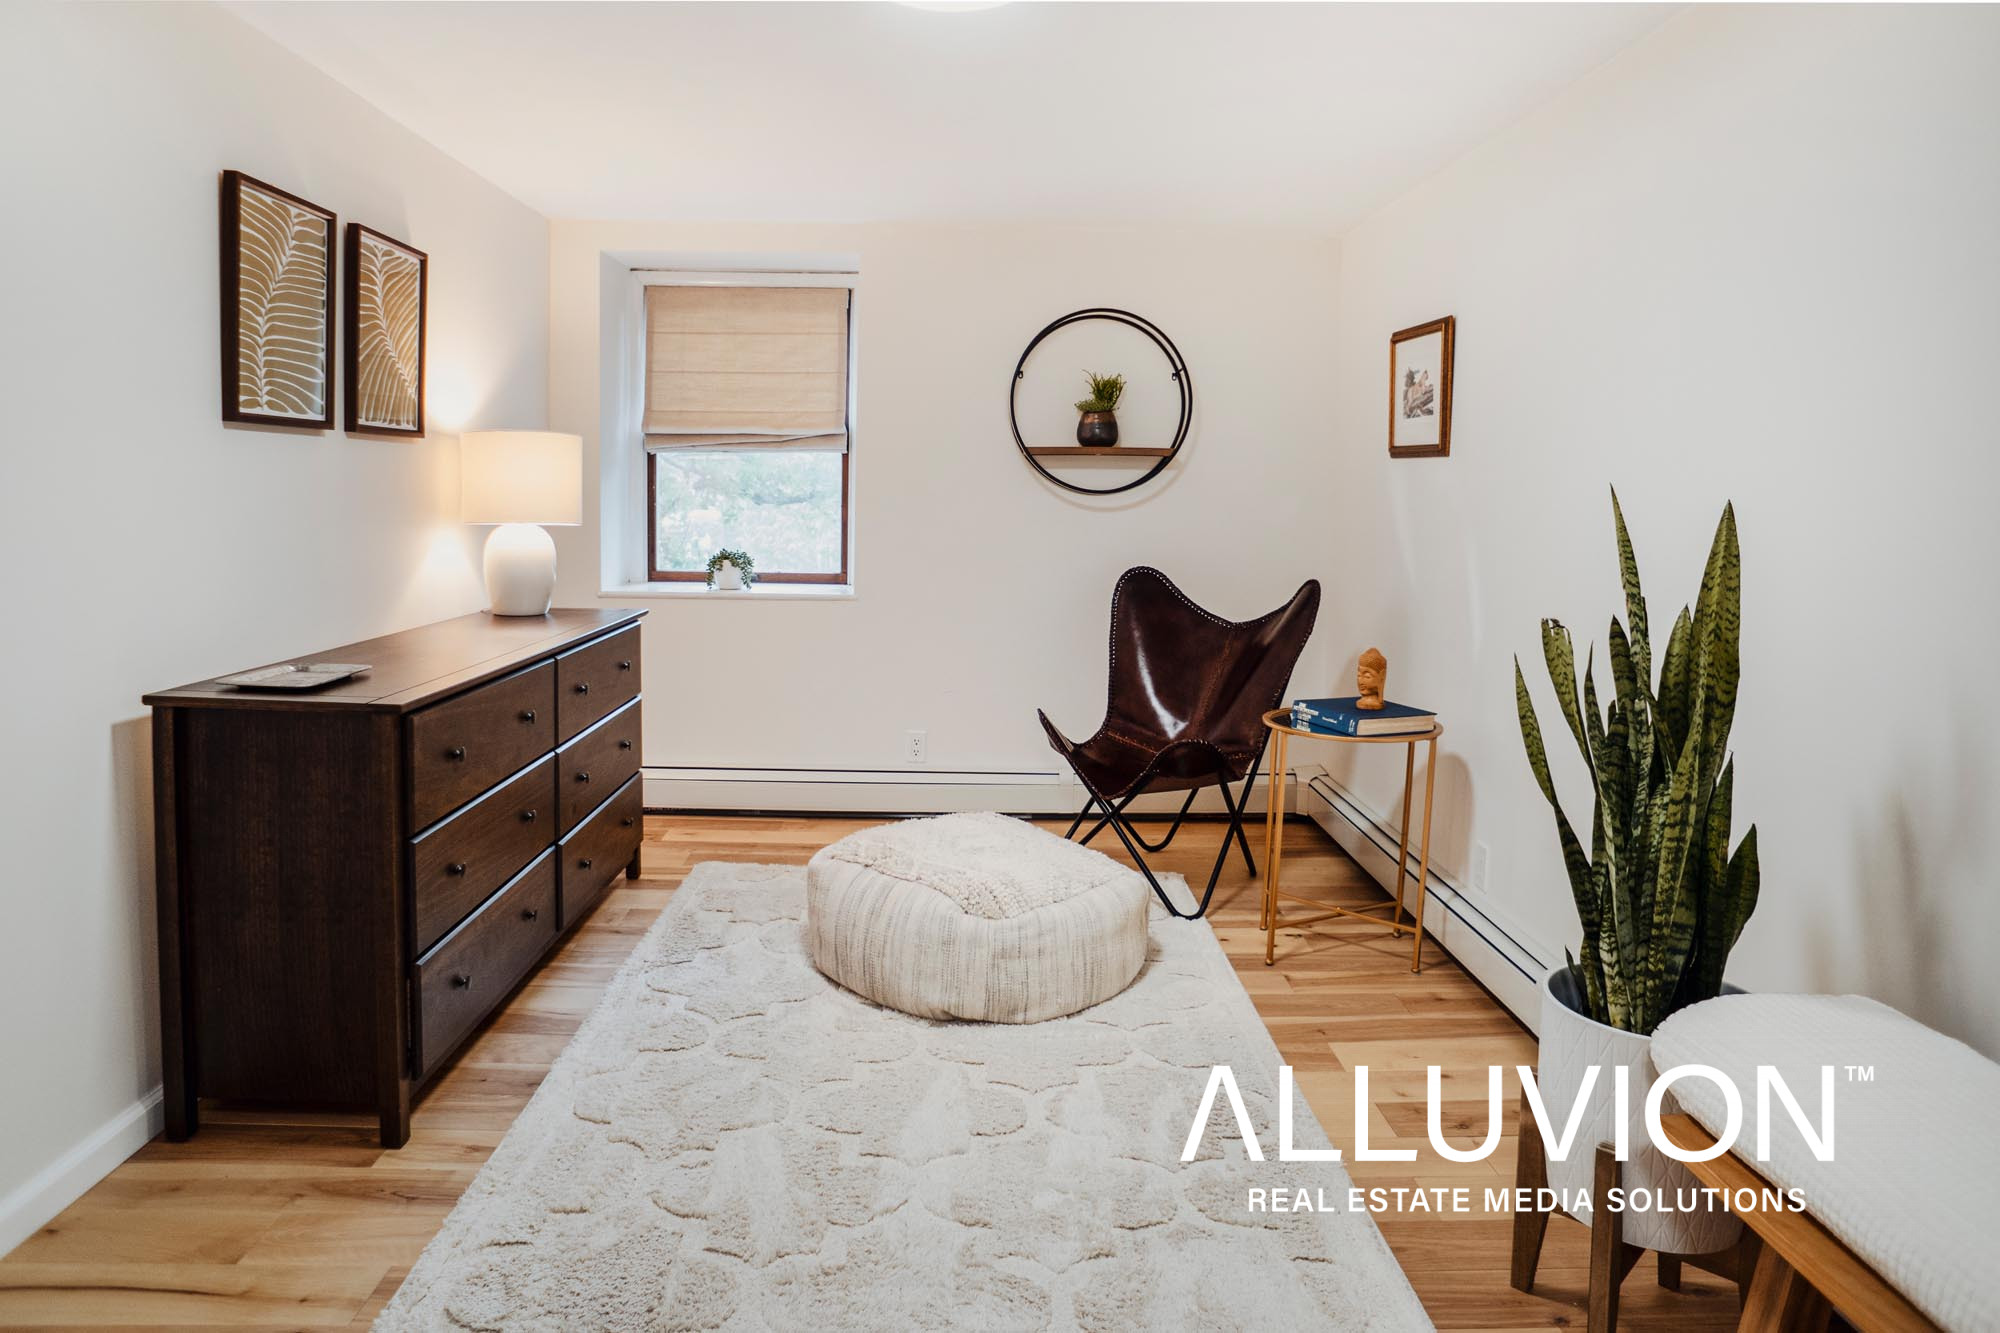 Modern Rustic Airbnb Home in Staatsburg, NY – Hudson Valley Vacation Rental Photography – Vacation Rental Management – ALLUVION Real Estate